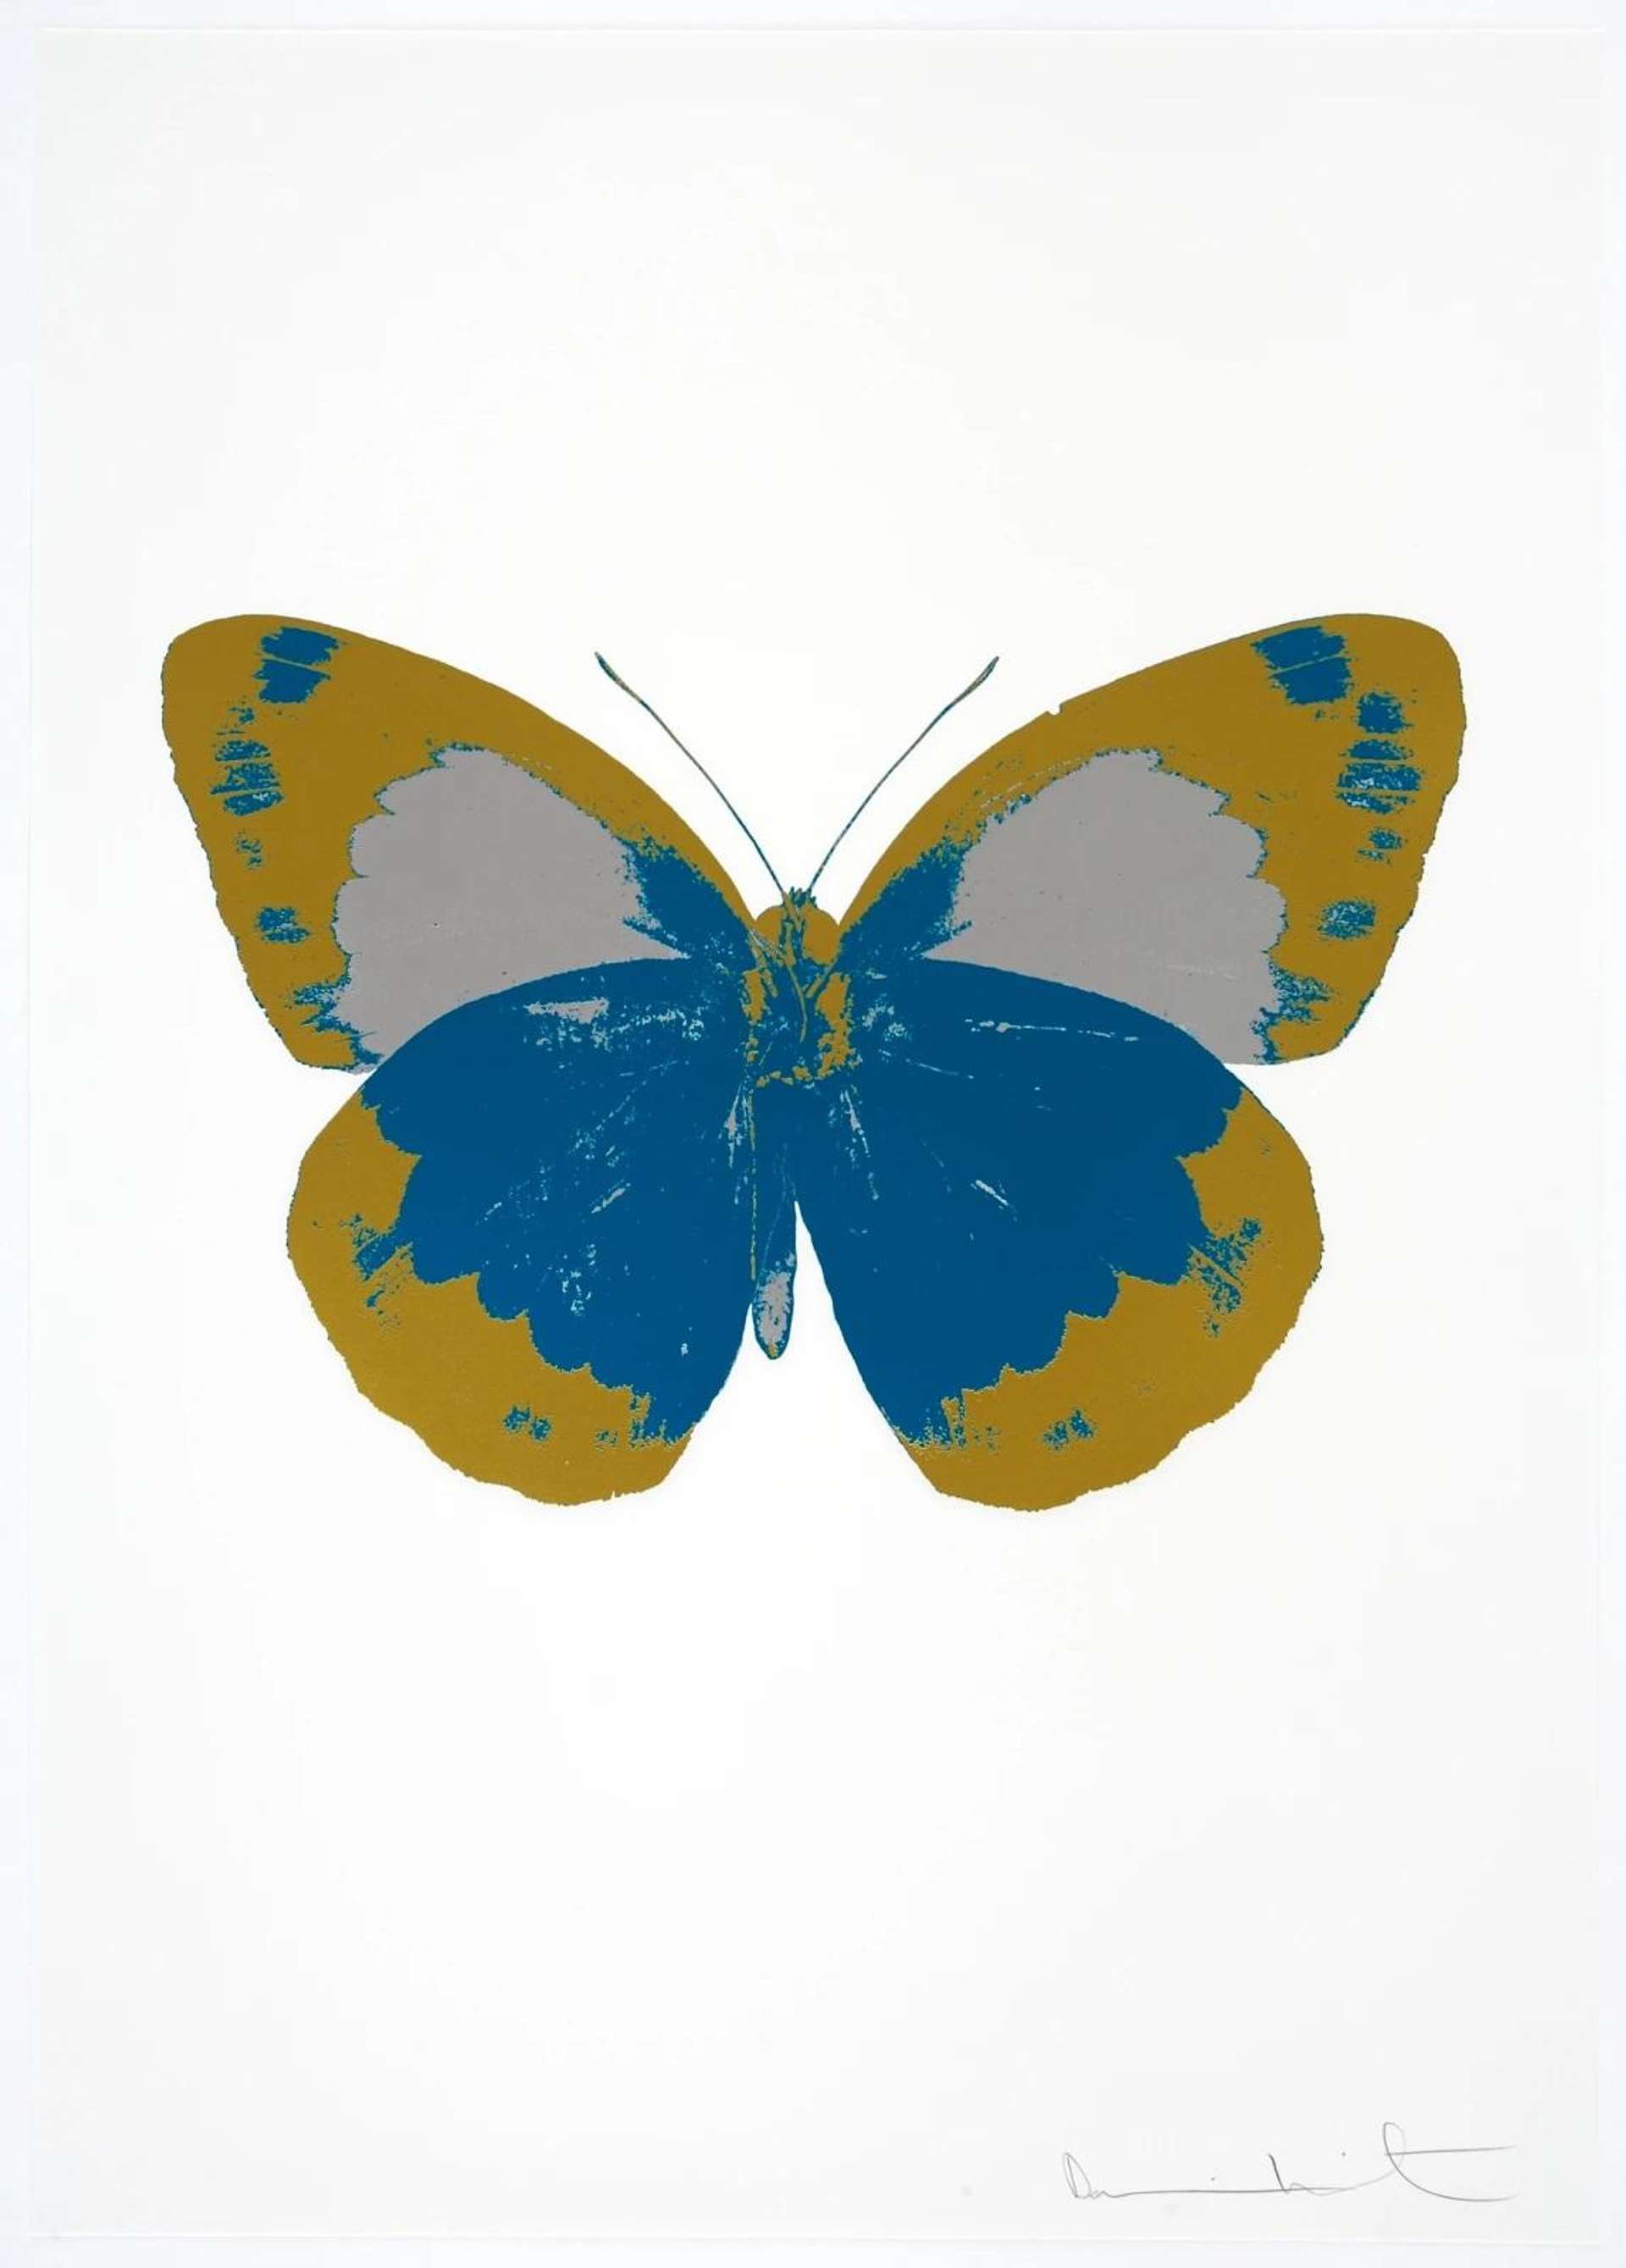 The Souls II (turquoise, oriental gold, silver gloss) - Signed Print by Damien Hirst 2010 - MyArtBroker